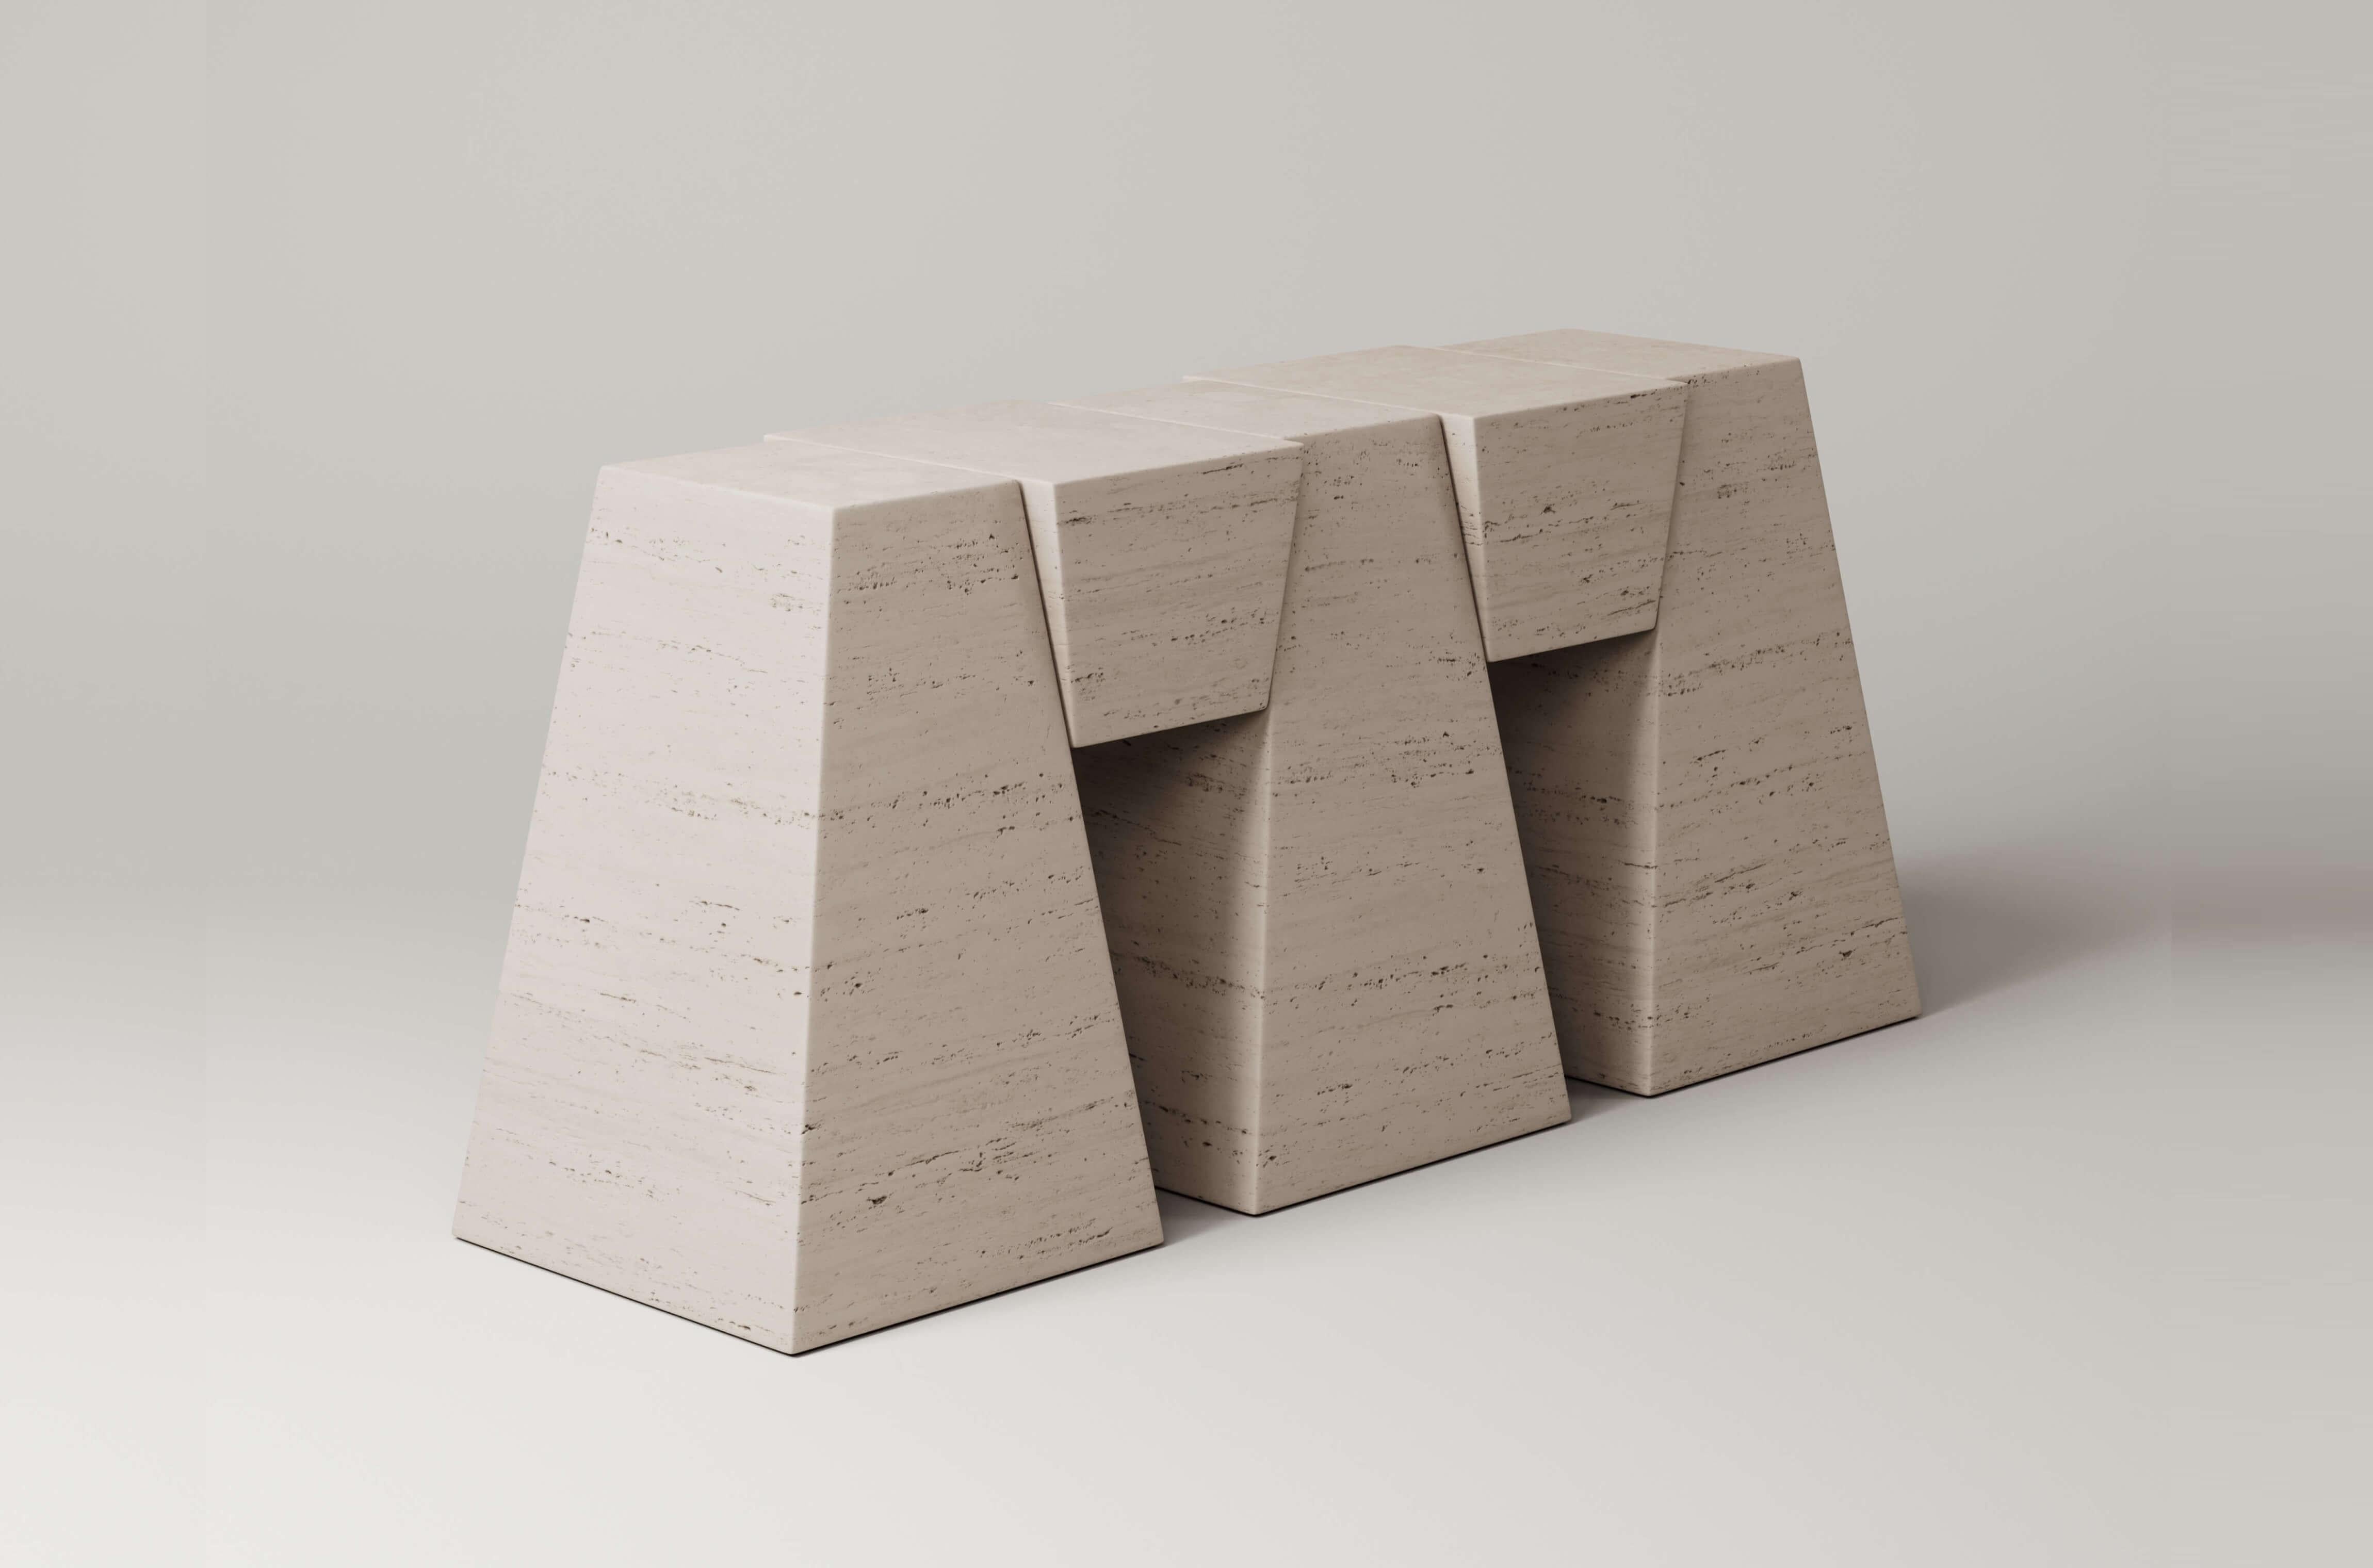 M_006 Travertine Console by Monolith Studio
Signed and Numbered.
Dimensions: D 45 x W 165 x H 78 cm.
Materials: Travertine.

Available in travertine, walnut, white oak and lava rock.  Please contact us. 

Monolith, founded in 2022 by Marc Personick,